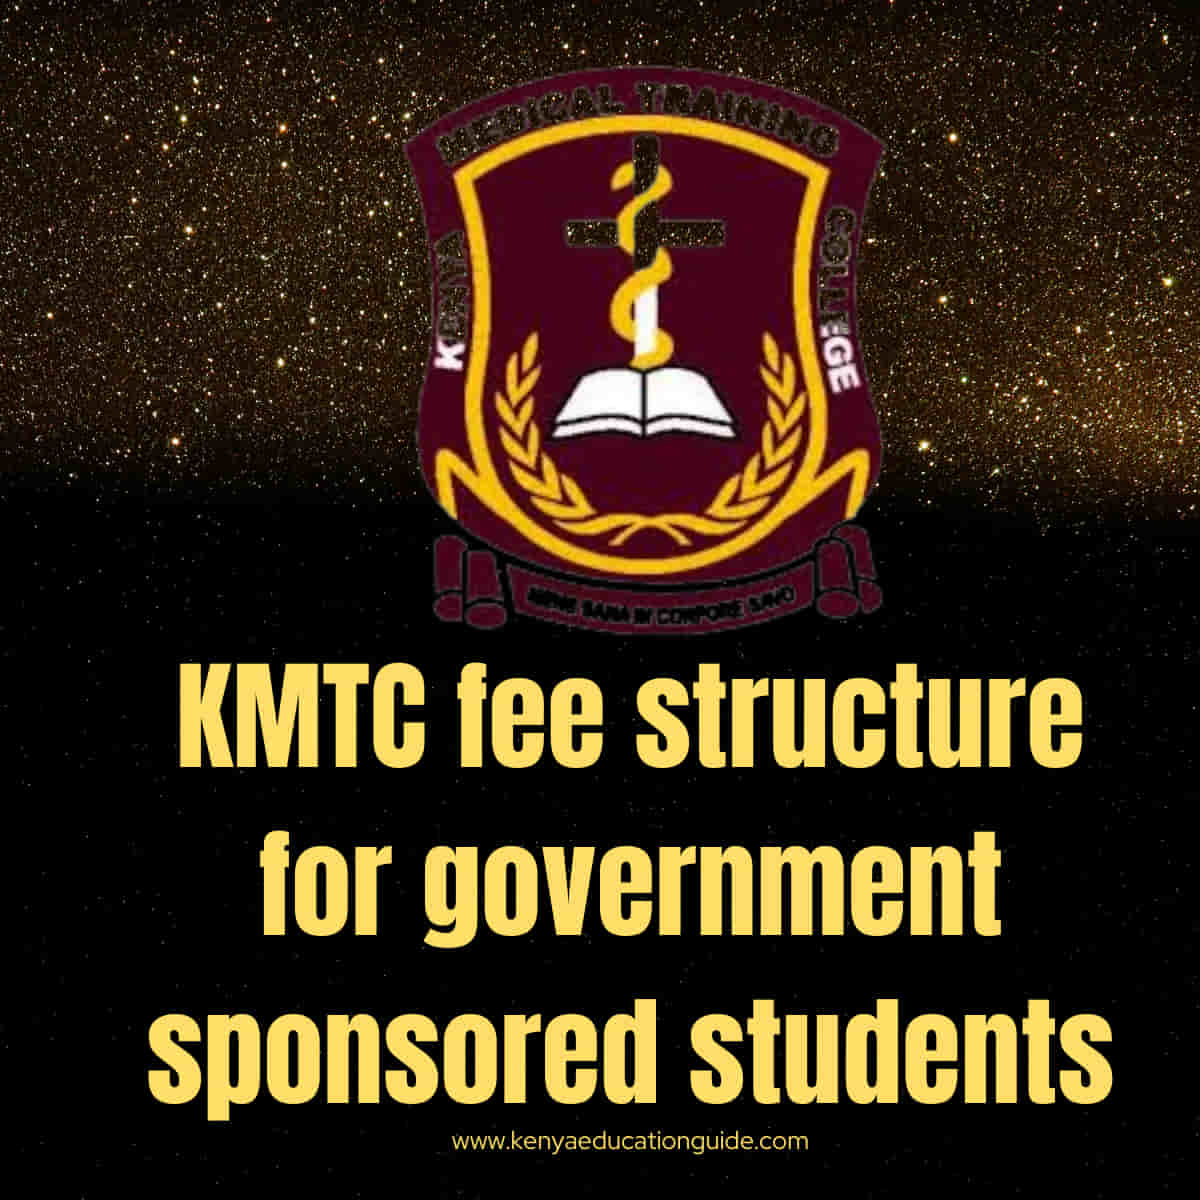 KMTC fee structure for government sponsored students